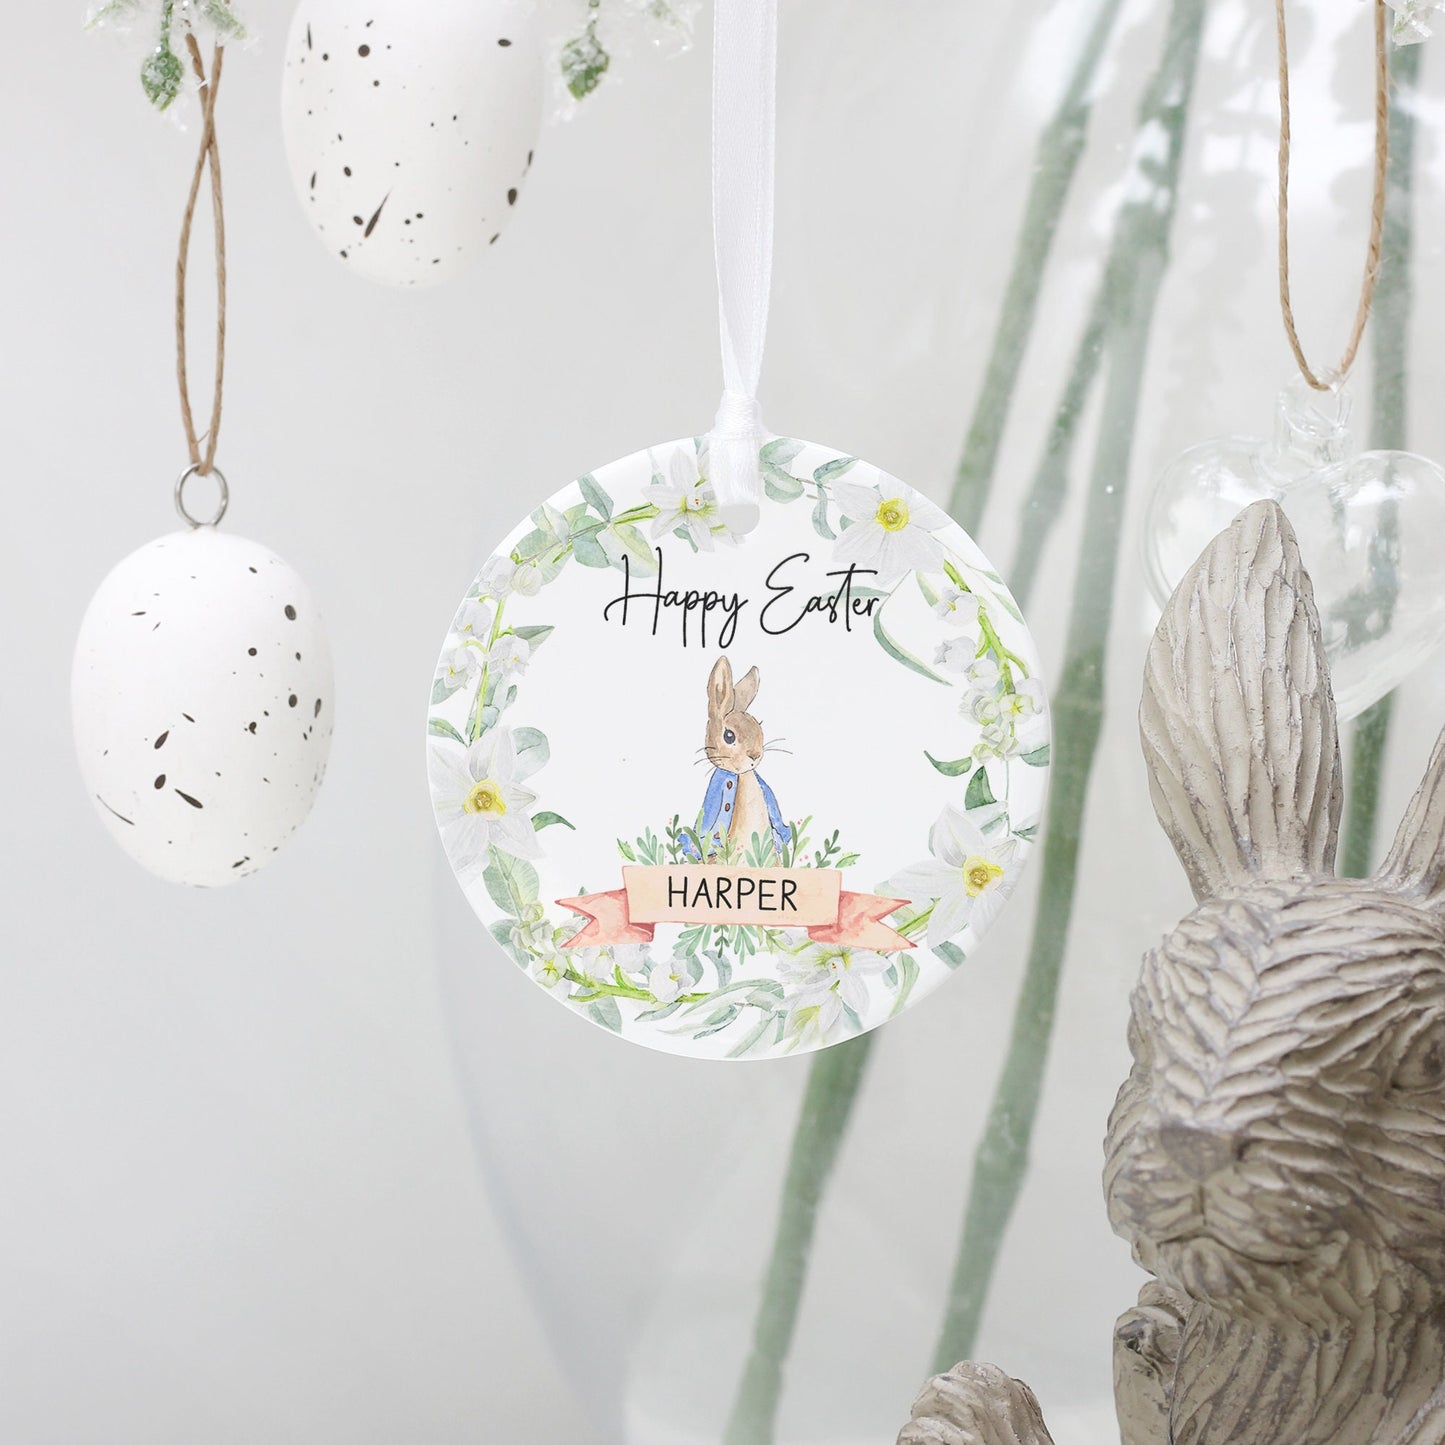 Personalised Happy Easter Decoration, Bunny Rabbit Easter Gift, Easter Egg Hunt Gifts, Baby Girl Boy First Easter, Easter Gifts